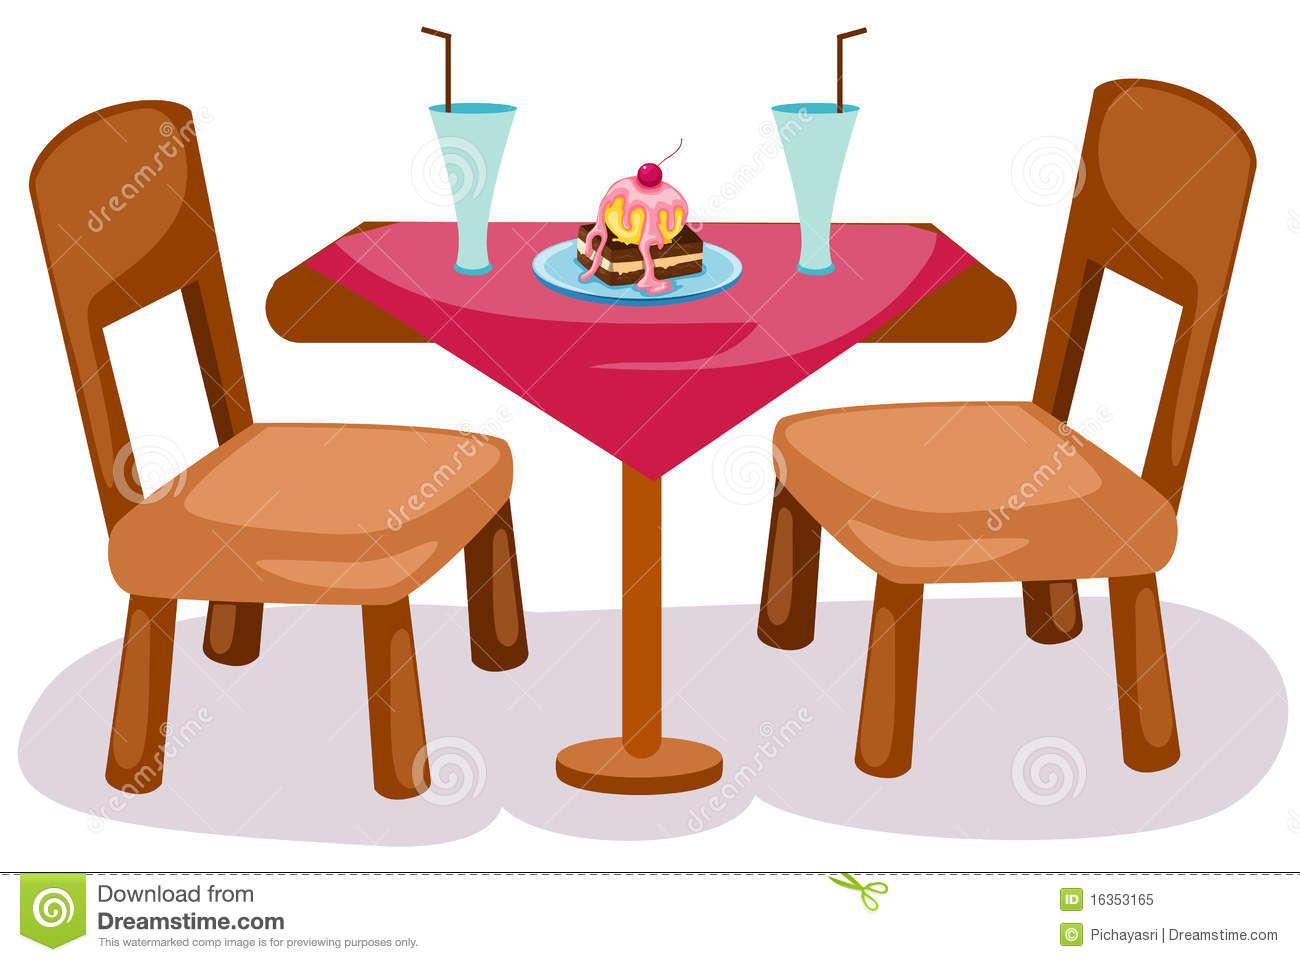 Cafeteria clipart dining room, Cafeteria dining room